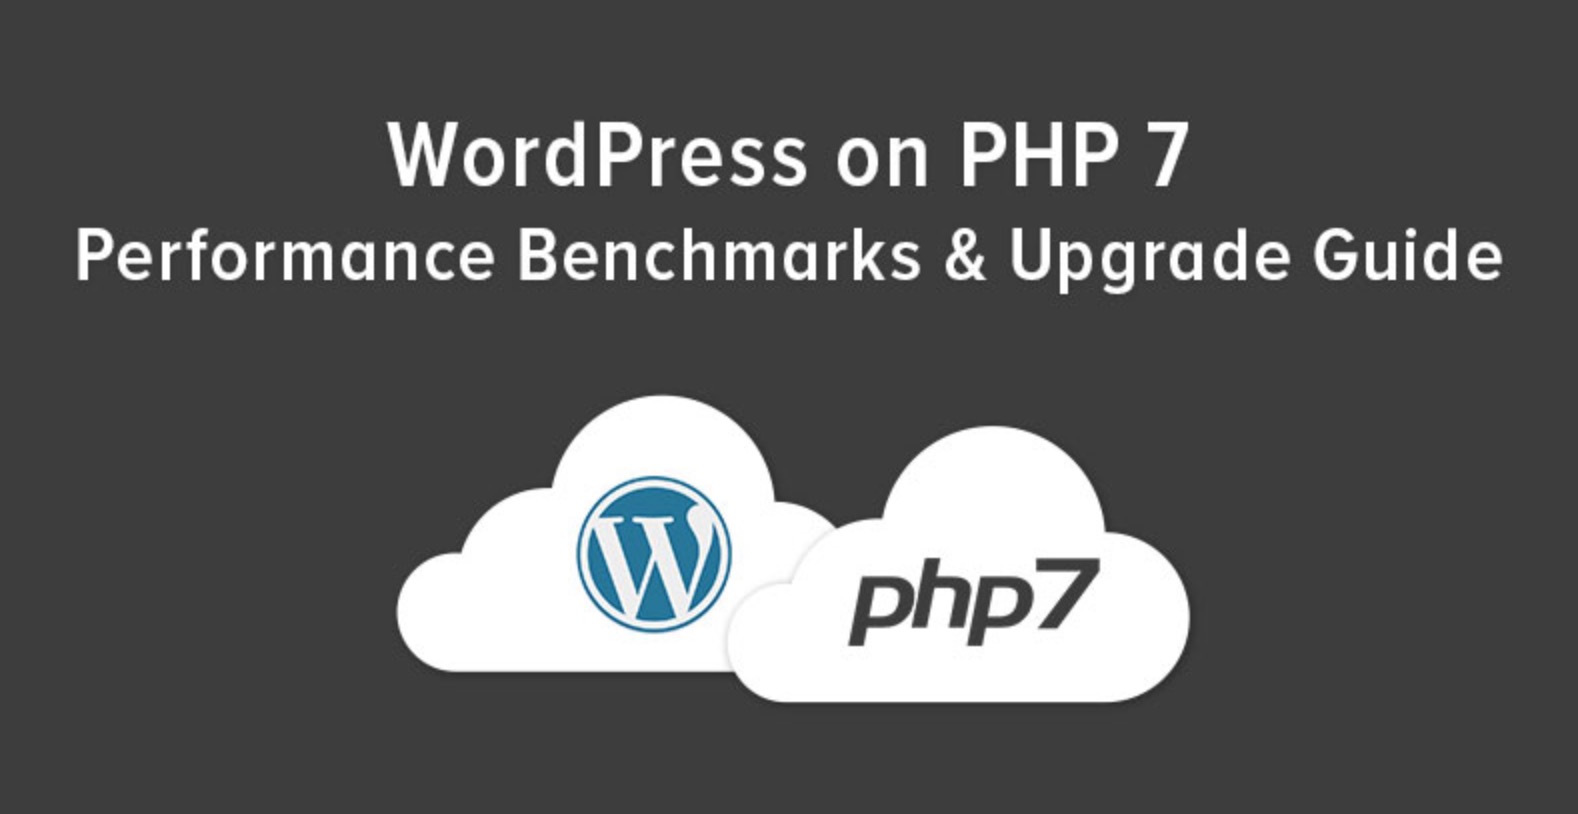 Speeding up your Wordpress page with PHP 7